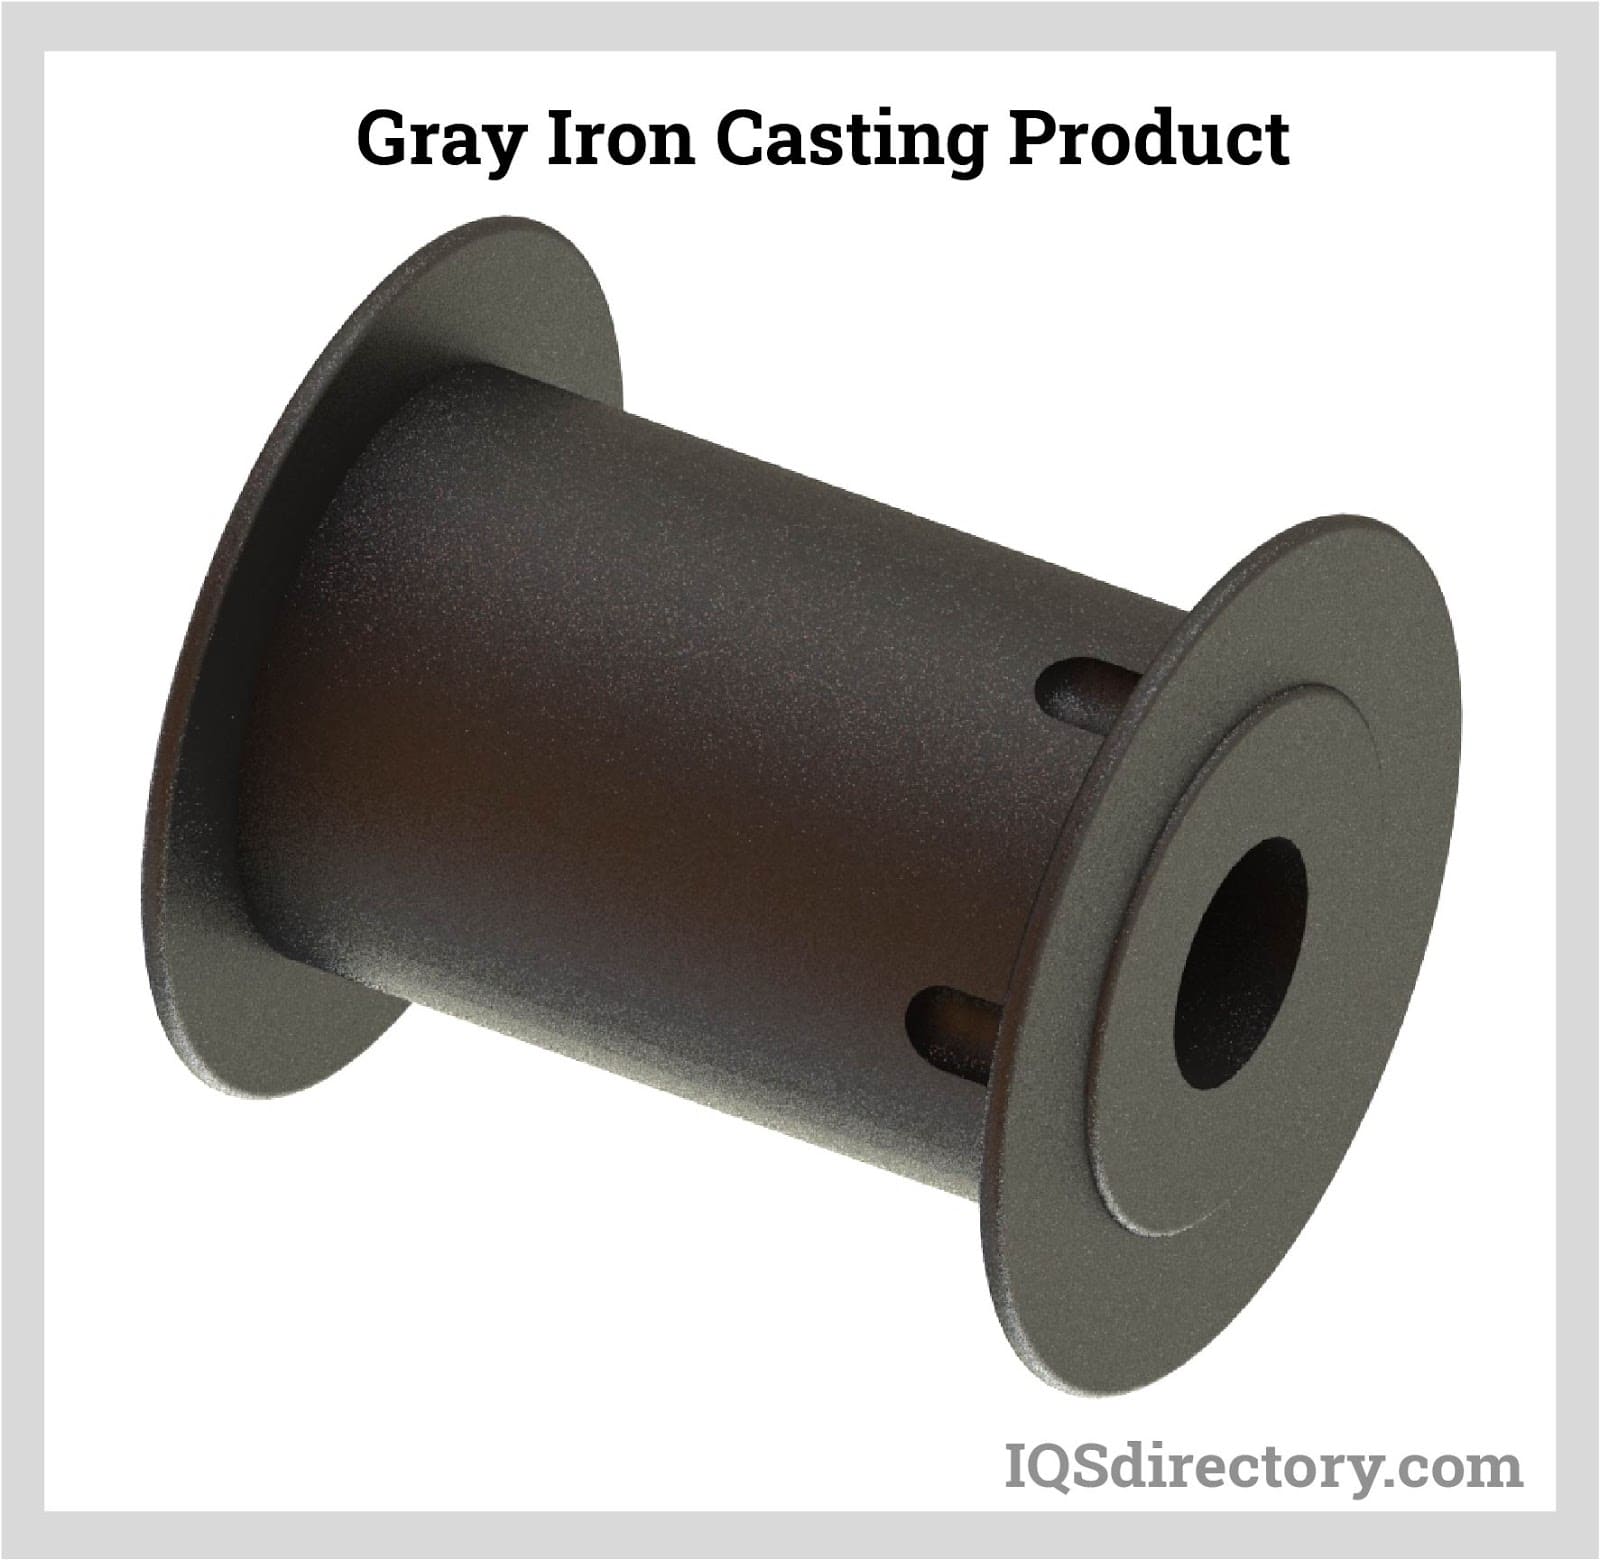 Gray Iron Casting Product